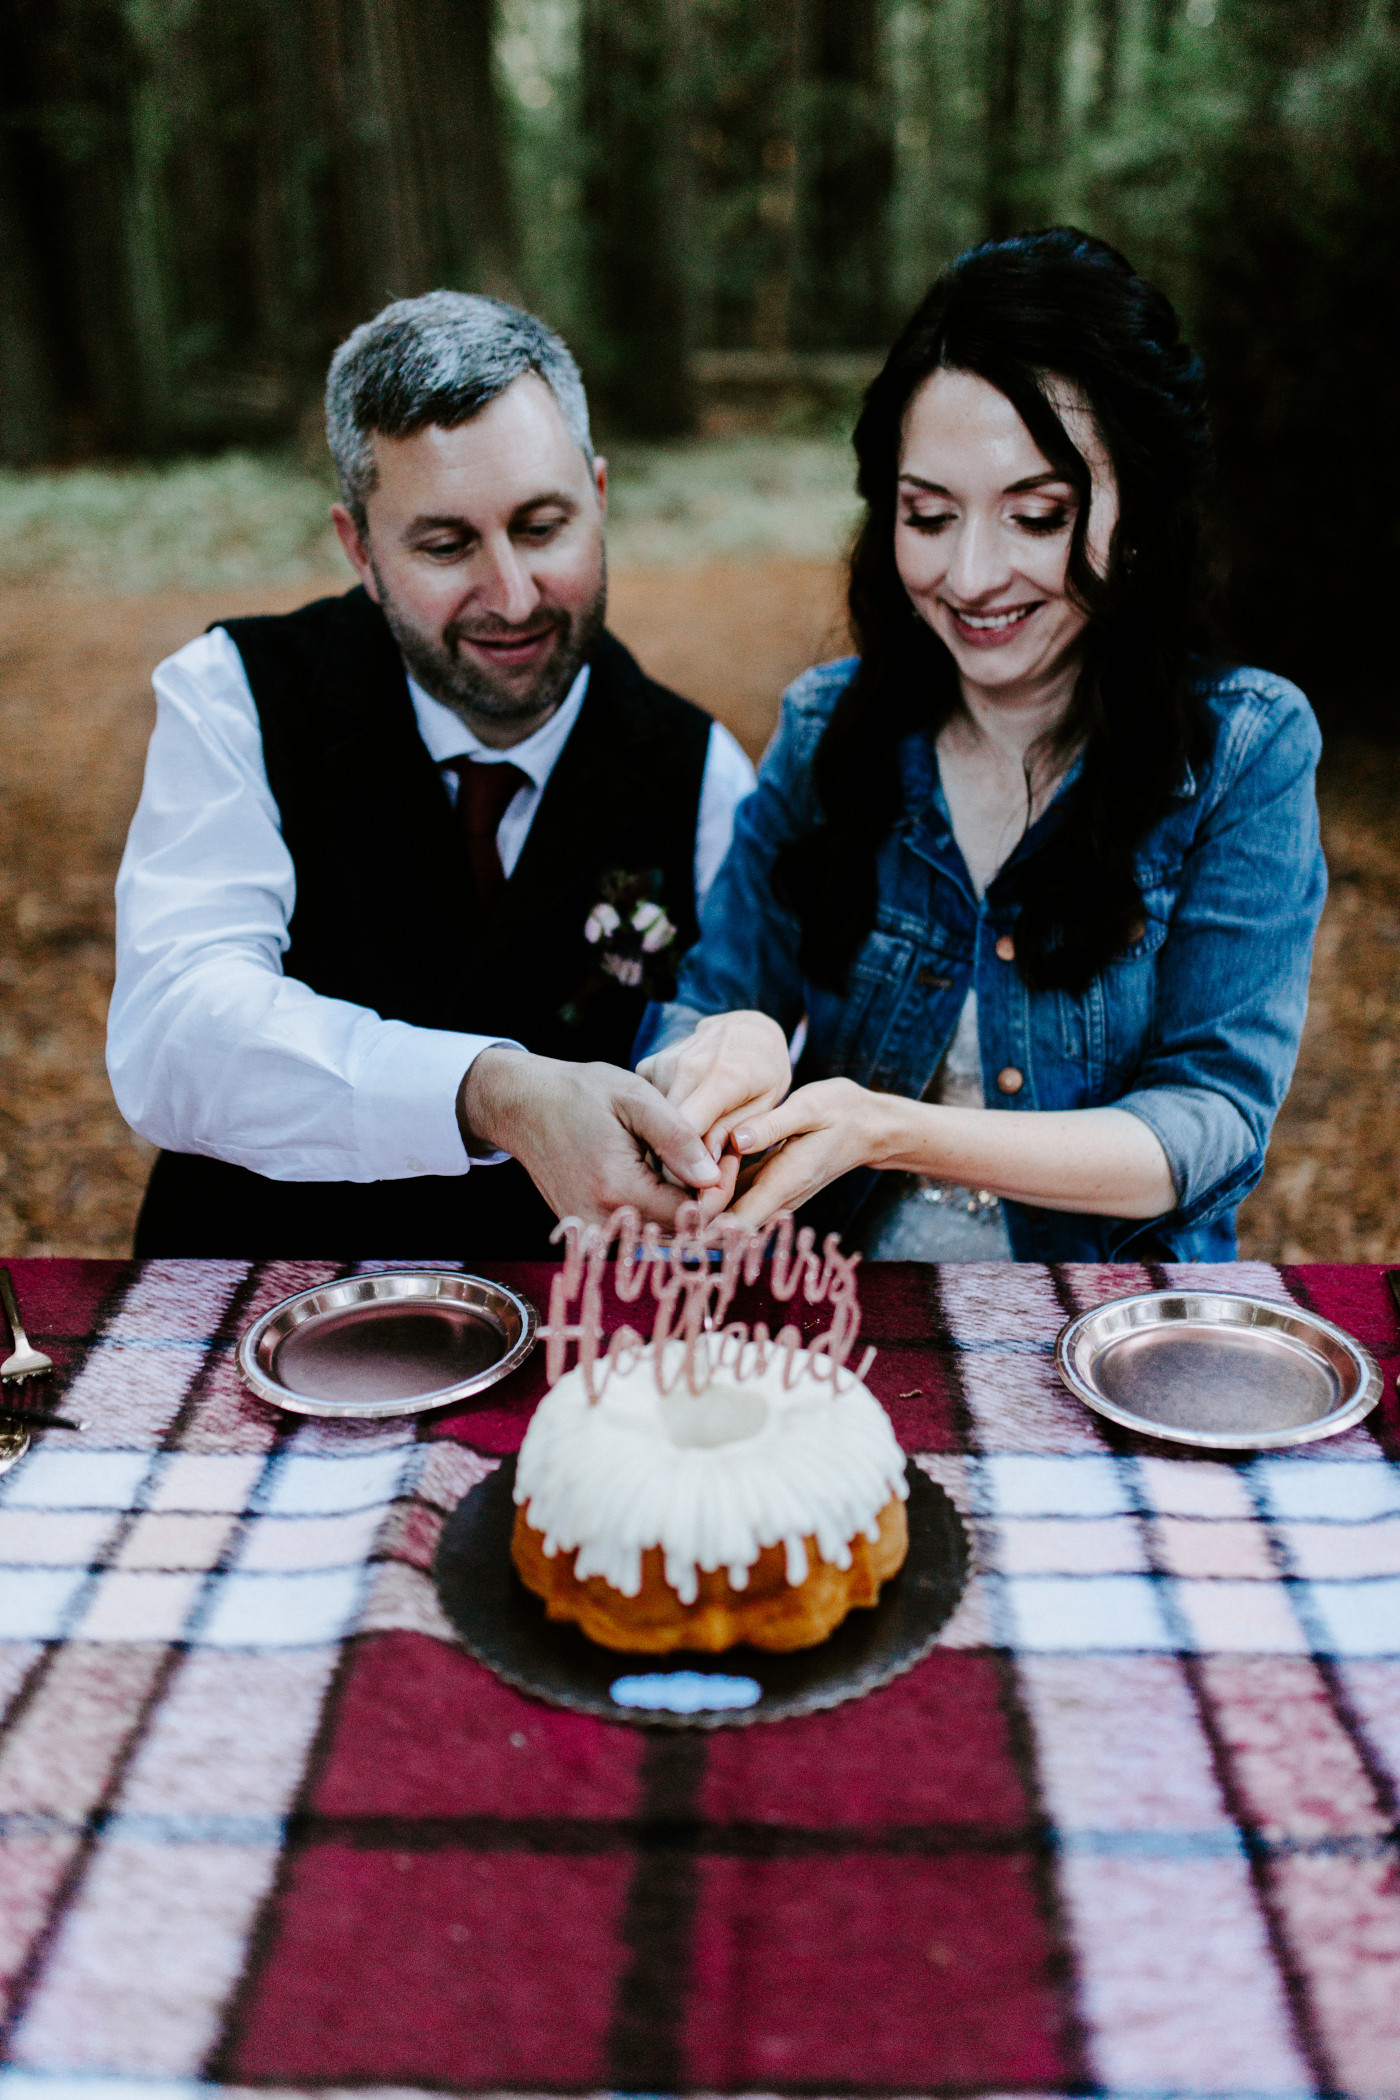 Tim and Hannah cut their wedding cake at their elopement picnic in the California Redwoods.